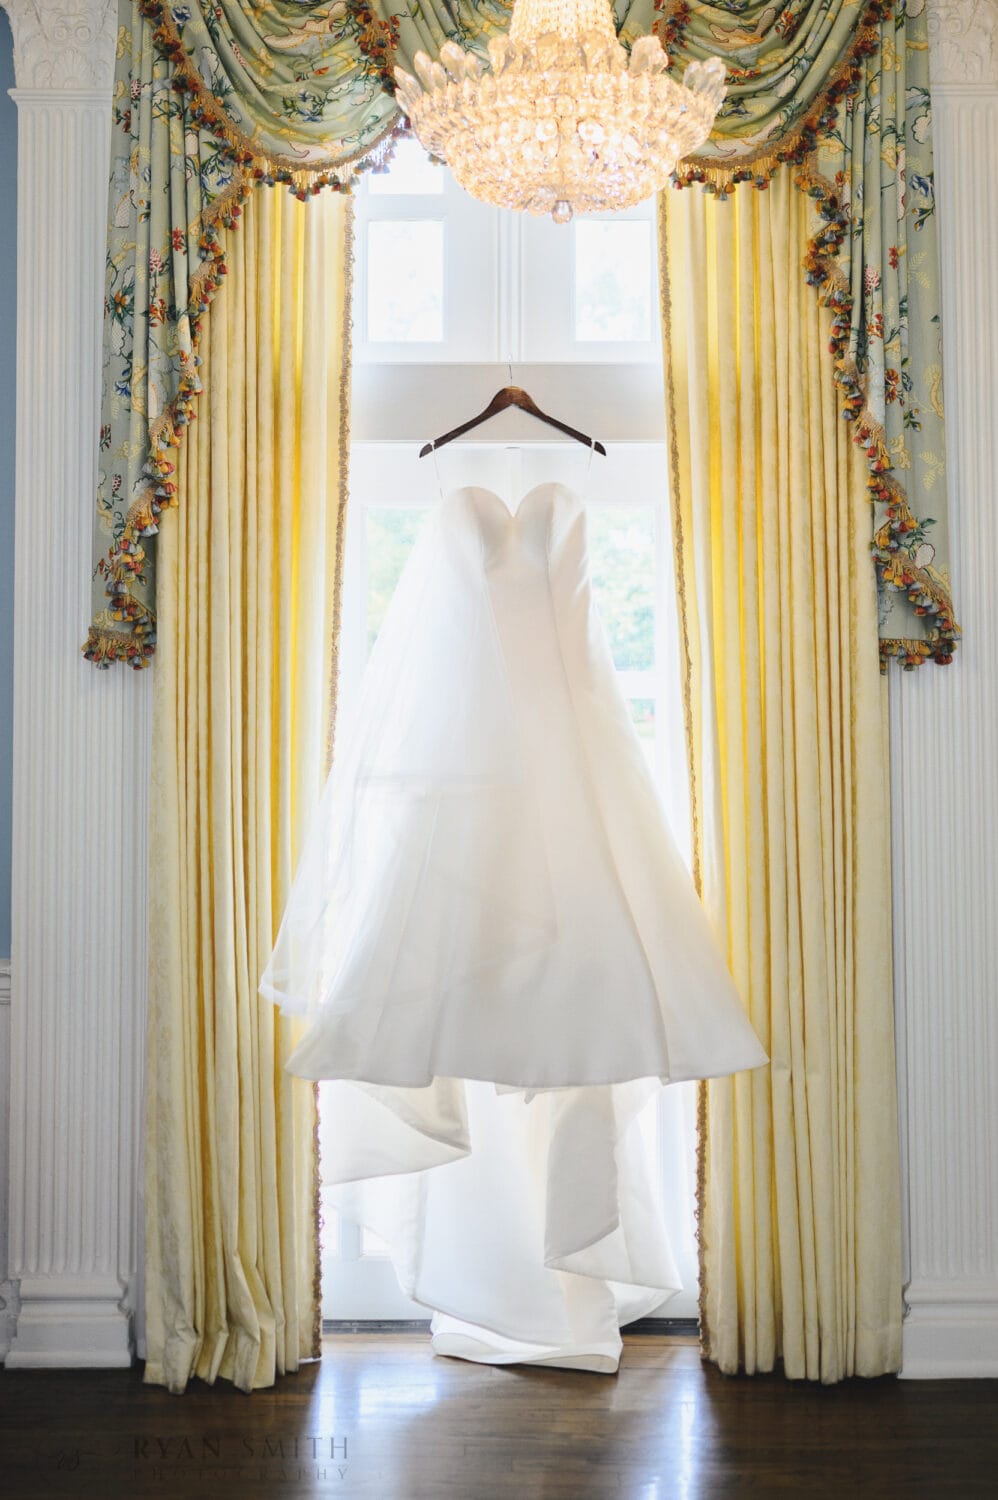 Wedding dress hanging in the window - Pine Lakes Country Club